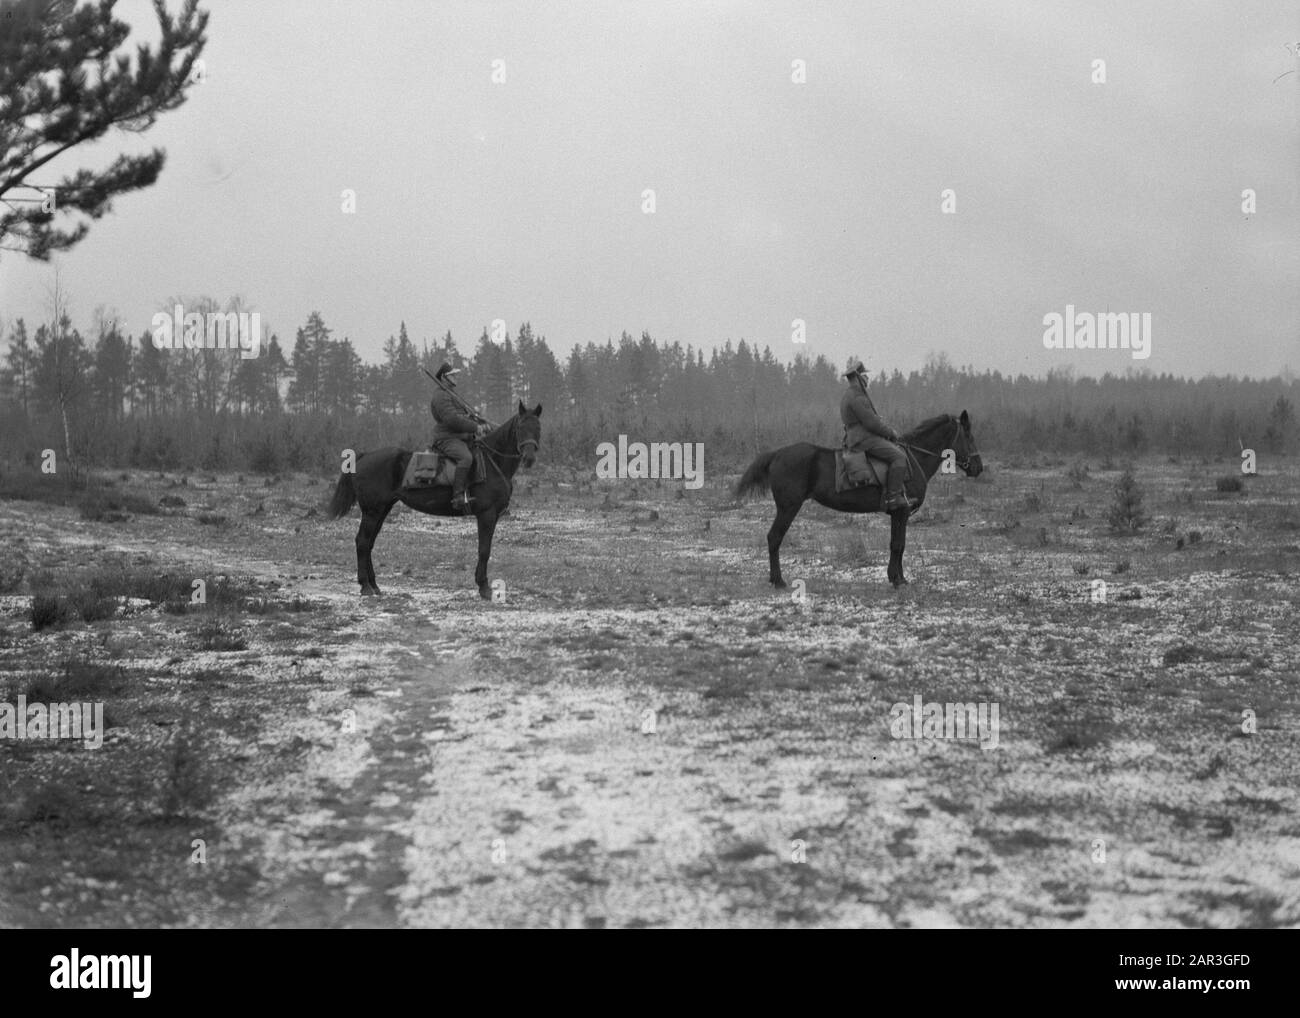 Journey to Poland  Patrol on horseback at Stoubcy Annotation: Stoubcy in Belarus is the former Stolpce in Poland Date: 1934 Location: Belarus Keywords: military, horses Stock Photo